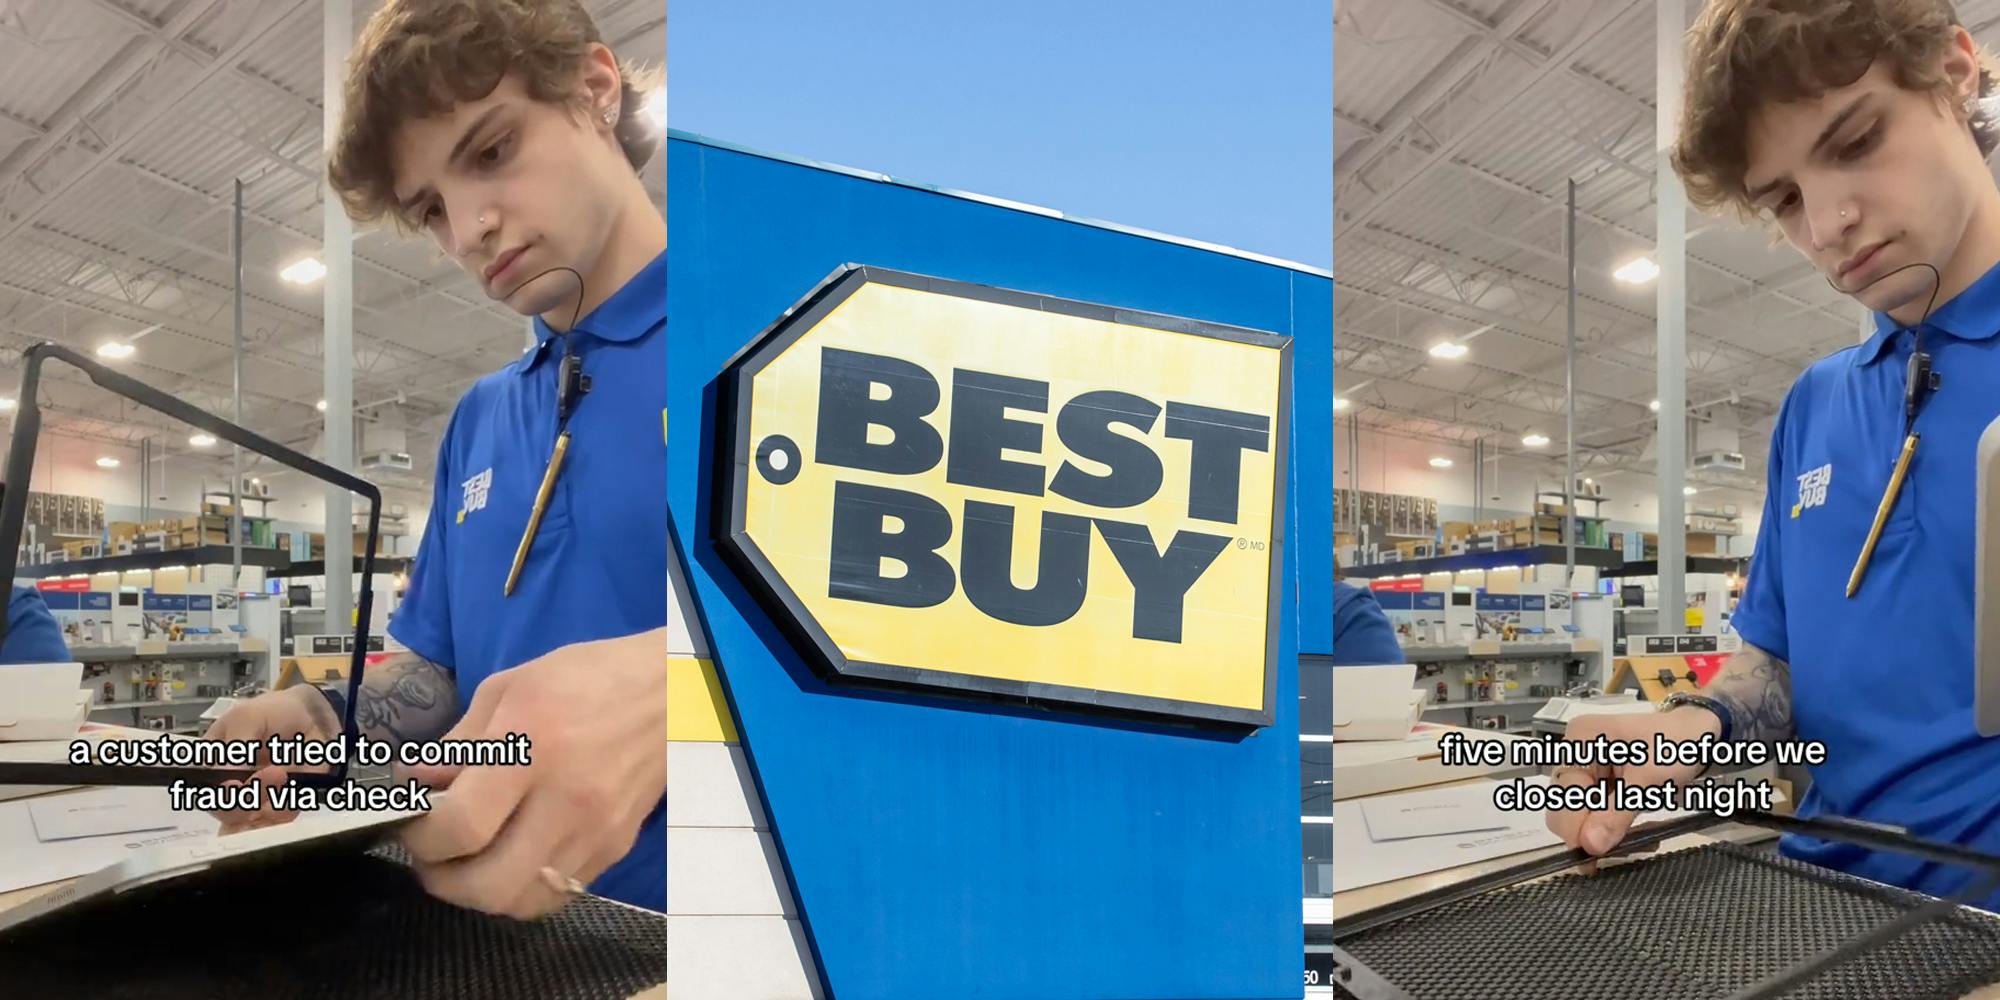 Best Buy employee with caption "a customer tried to commit fraud via check" (l) Best Buy building with sign (c) Best Buy employee with caption "five minutes before we closed last night" (r)